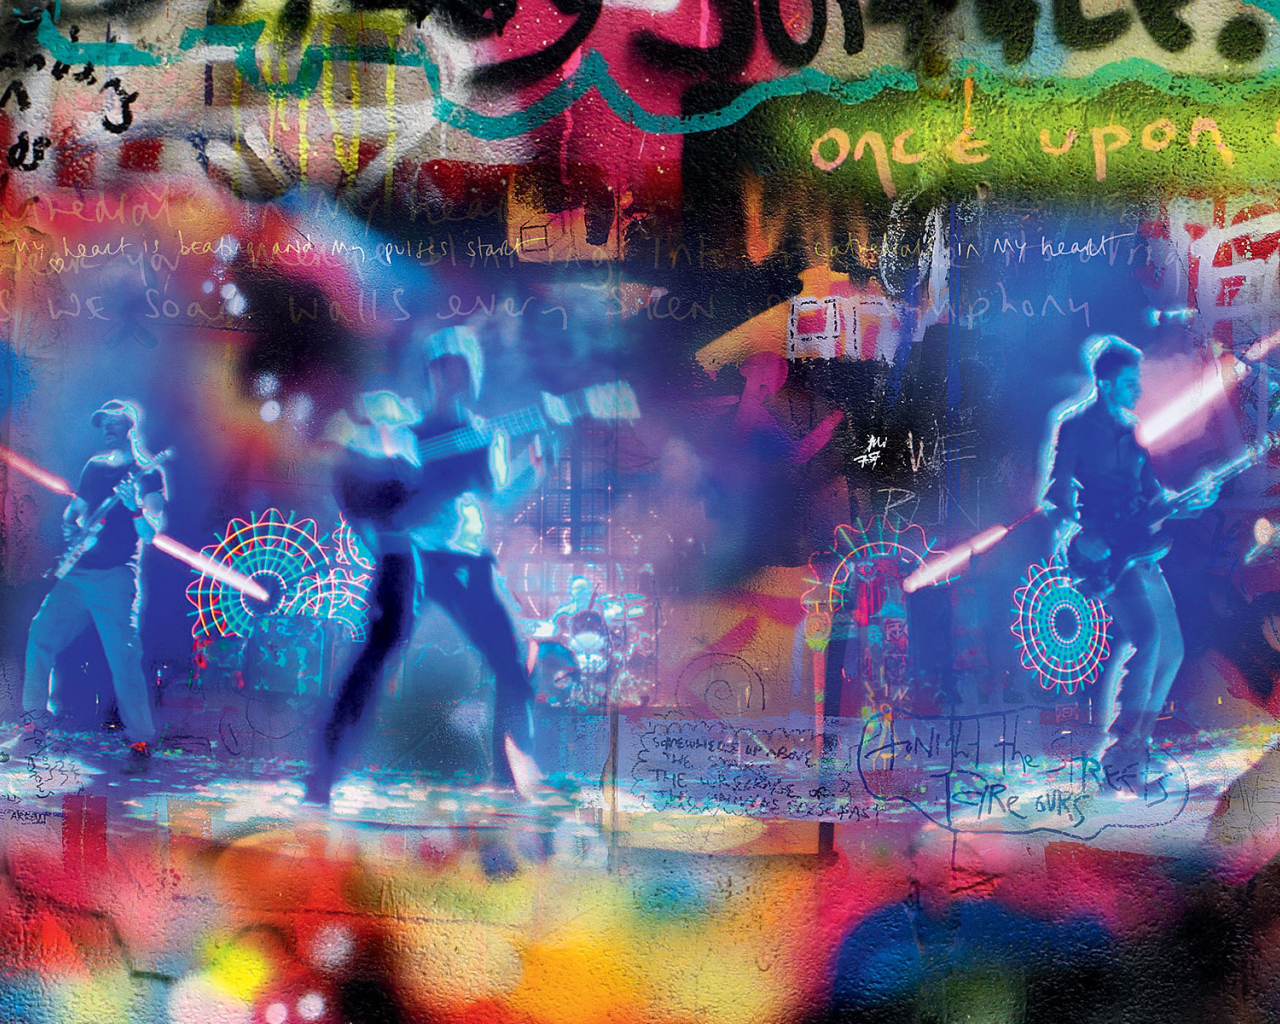 Coldplay graffity stile